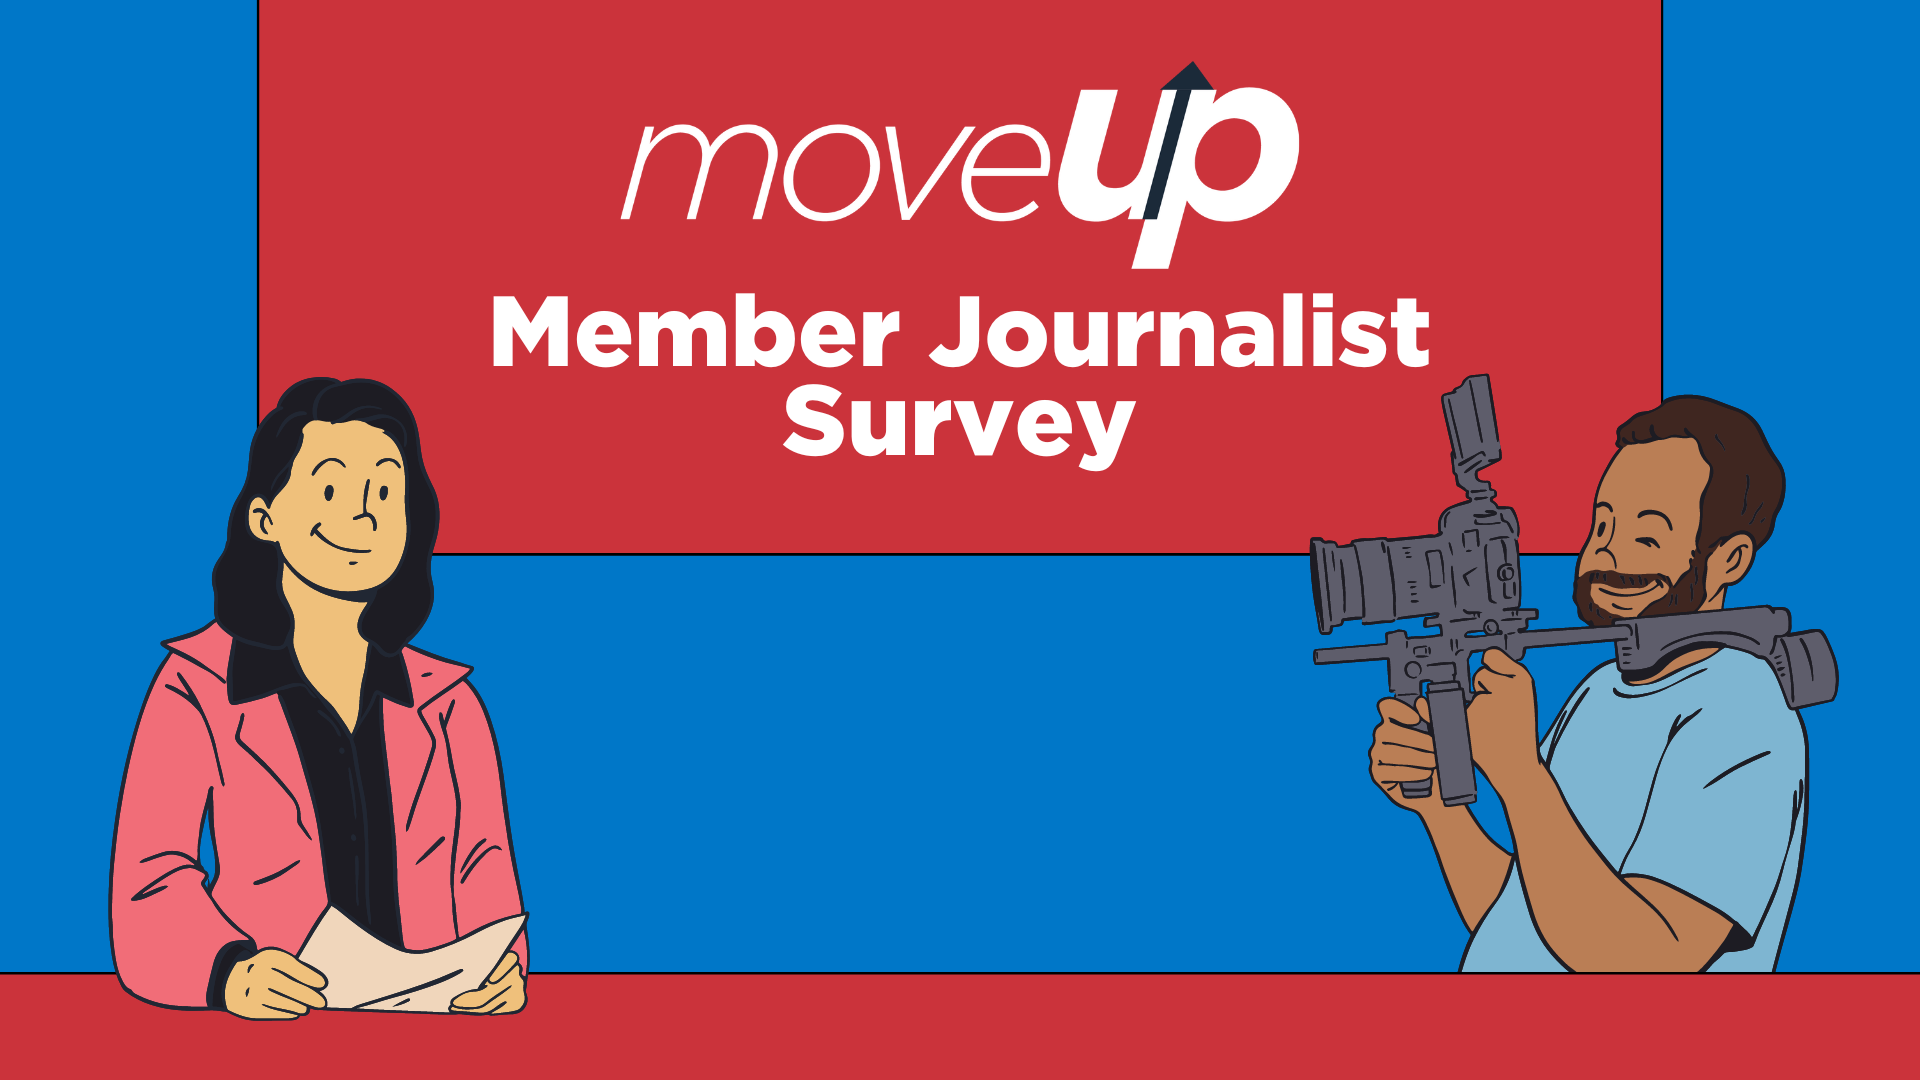 A cartoon of a person sitting at a desk holding a piece of paper, and another cameraperson beside them. A sign in the background reads: "MoveUP Member Journalist Survey"